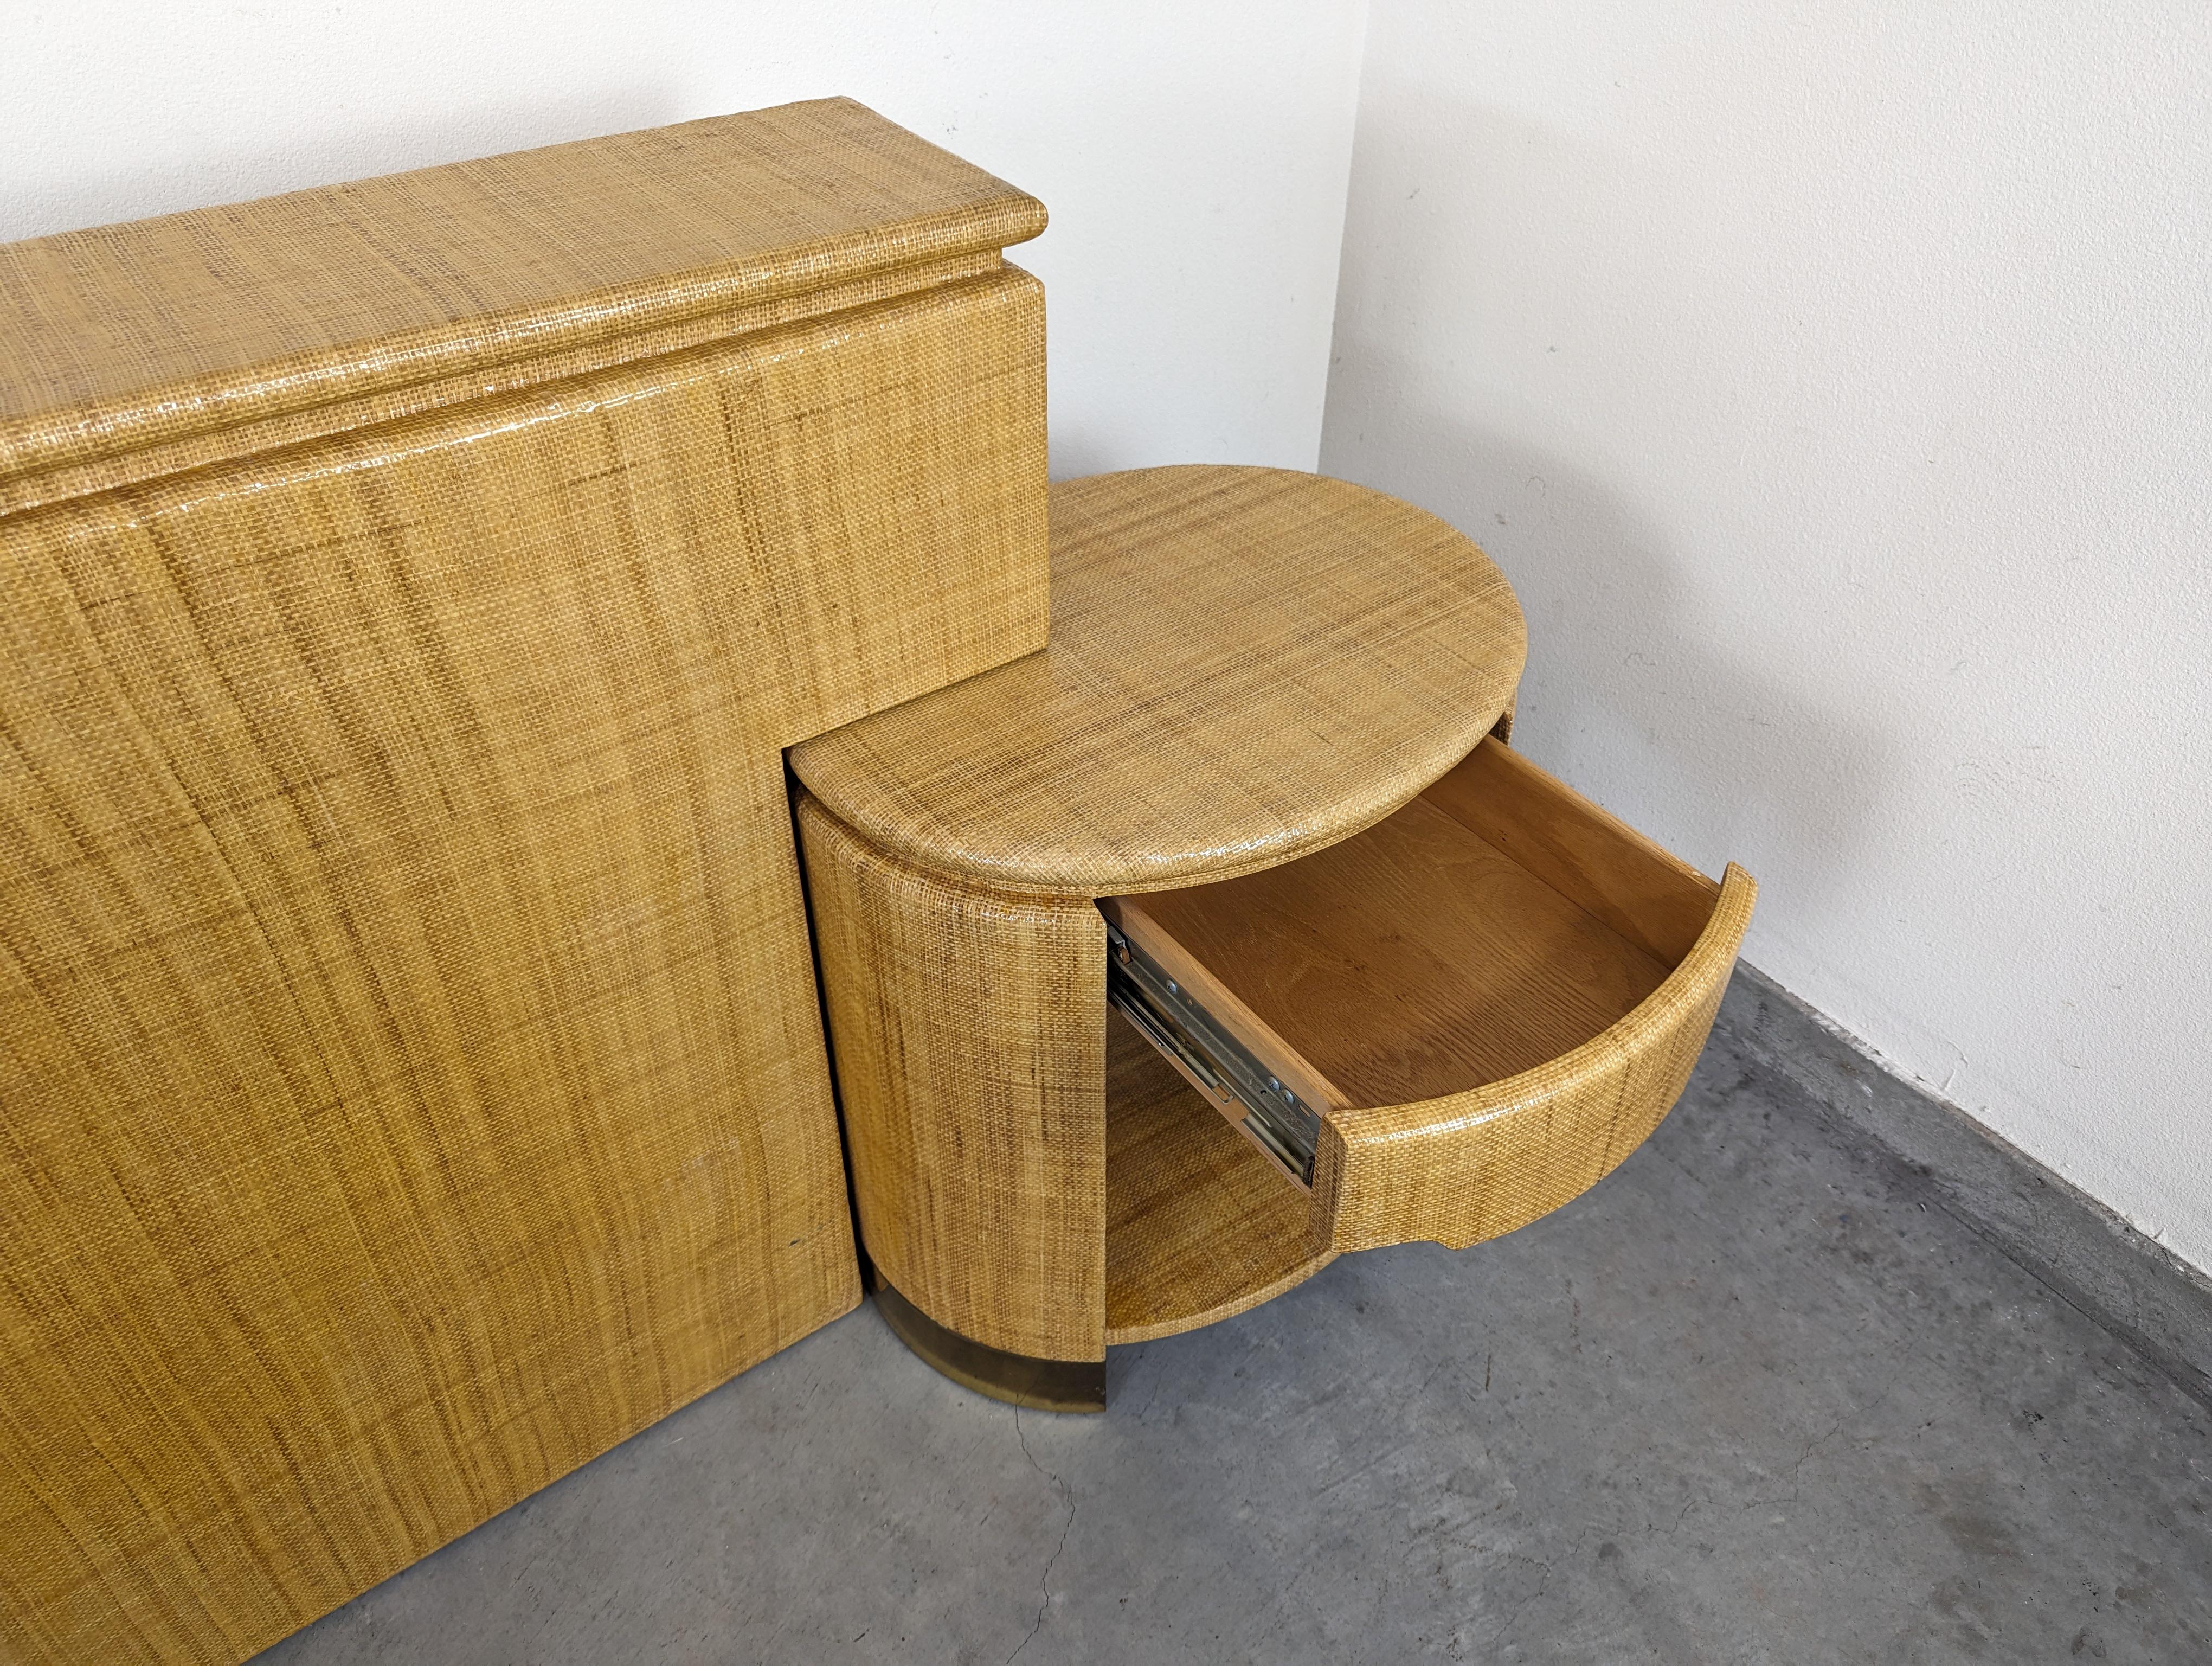 Late 20th Century Raffia King Headboard with Matching Nightstands by Harrison Van Horn, c1970s For Sale